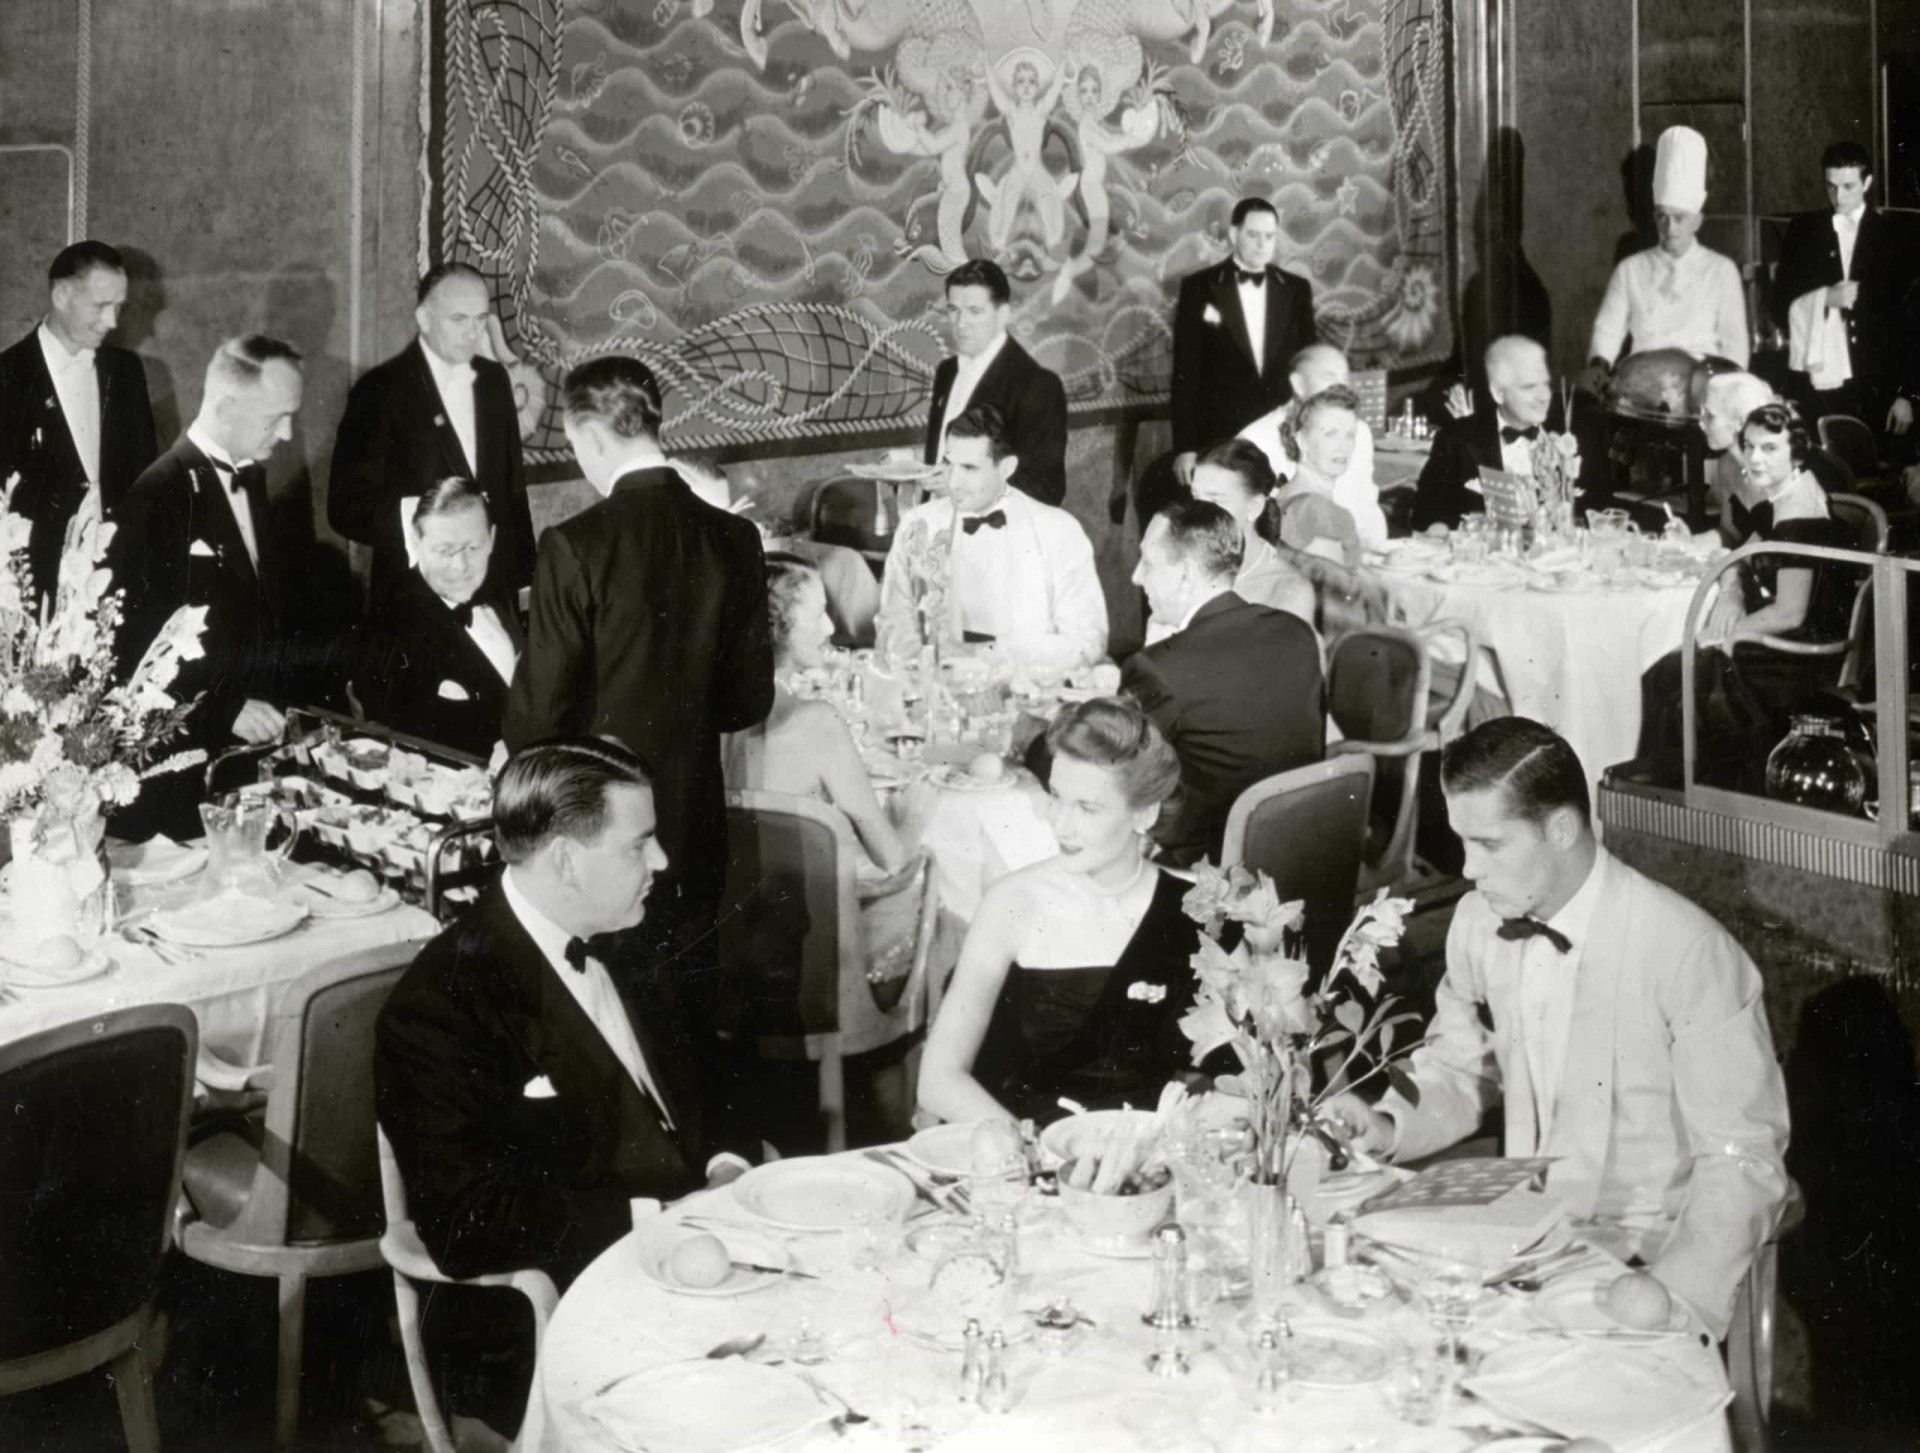 <p>With longer routes came more highly-refined passenger facilities. The first à la carte restaurants appeared on passenger vessels around 1910.</p><p>You may also like:<a href="https://www.starsinsider.com/n/393469?utm_source=msn.com&utm_medium=display&utm_campaign=referral_description&utm_content=502910v1en-ae"> Strangest pre-game rituals in professional sports</a></p>